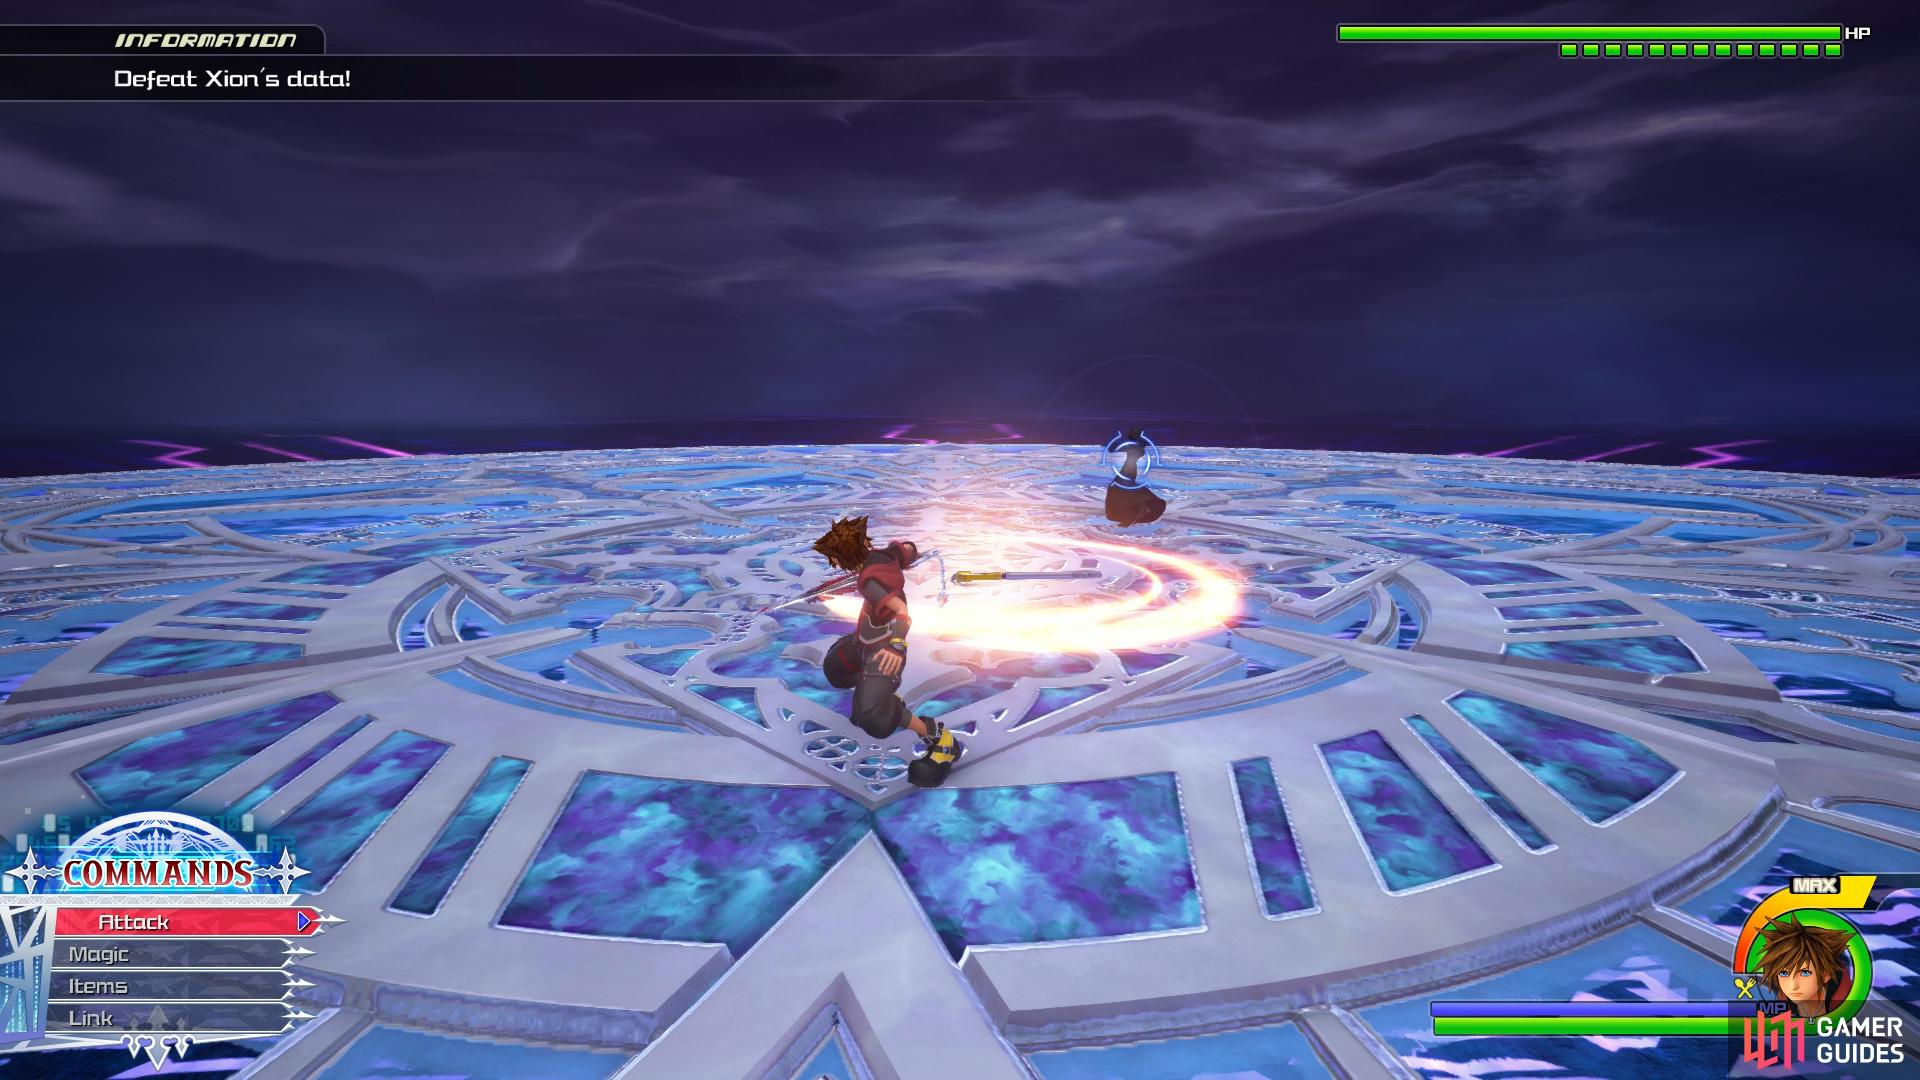 You can easily counter her Keyblade Throw